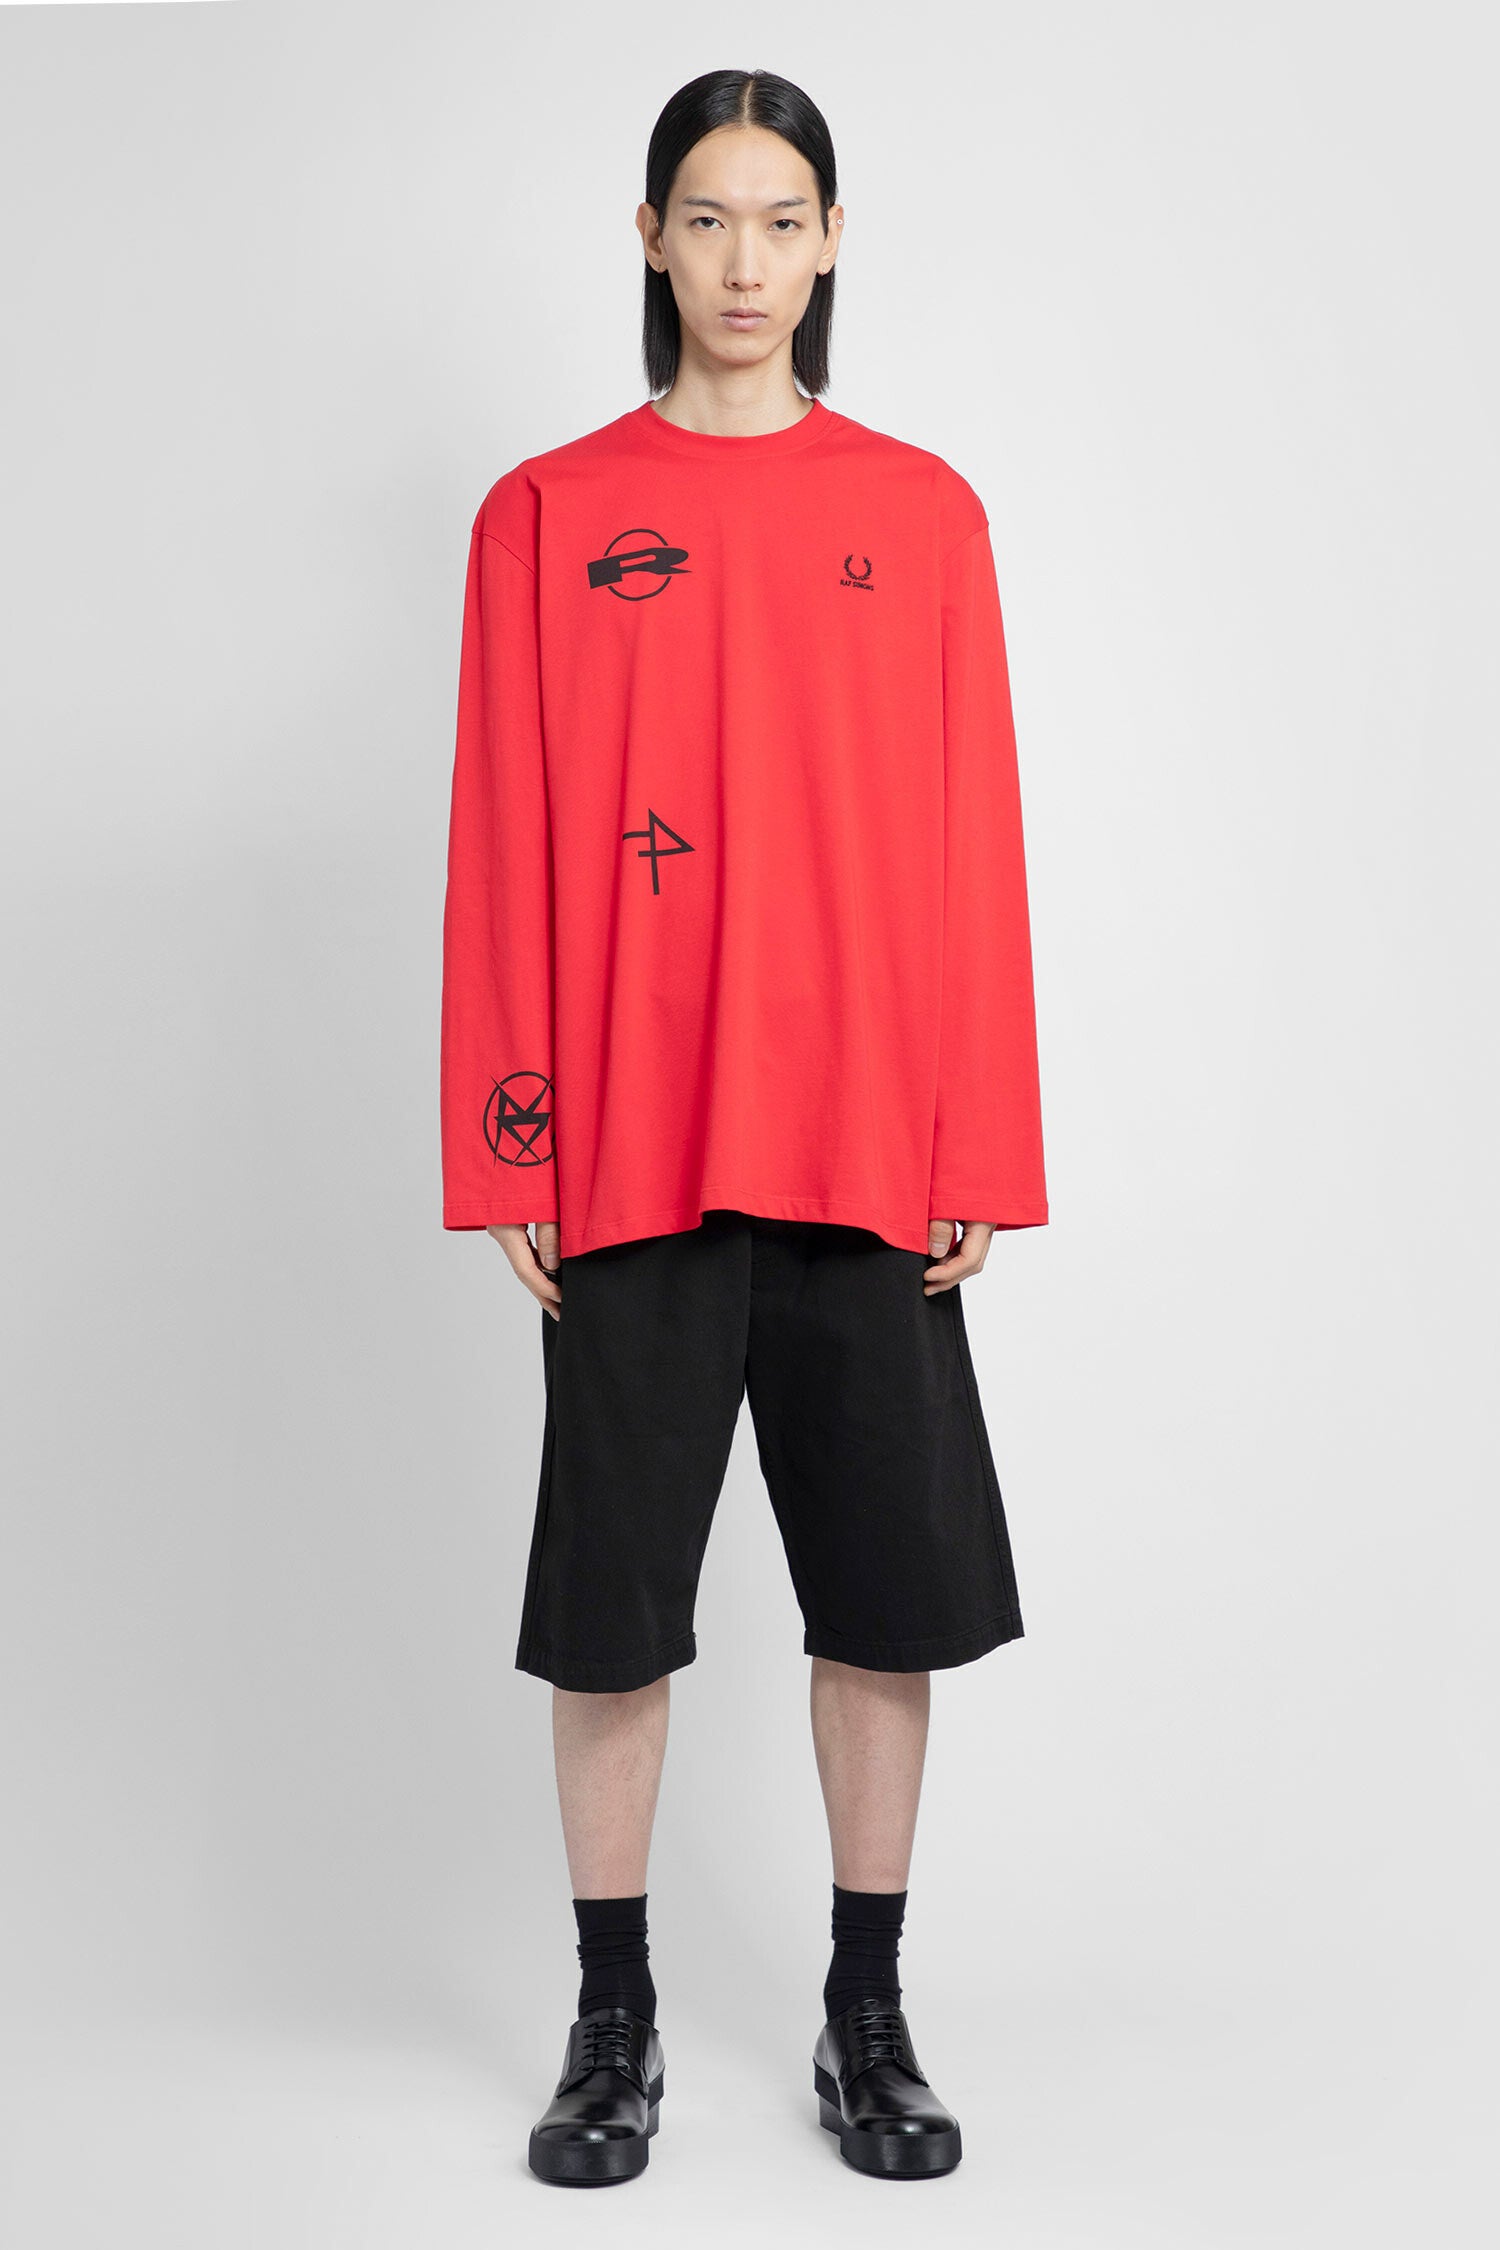 FRED PERRY X RAF SIMONS MAN RED T-SHIRTS